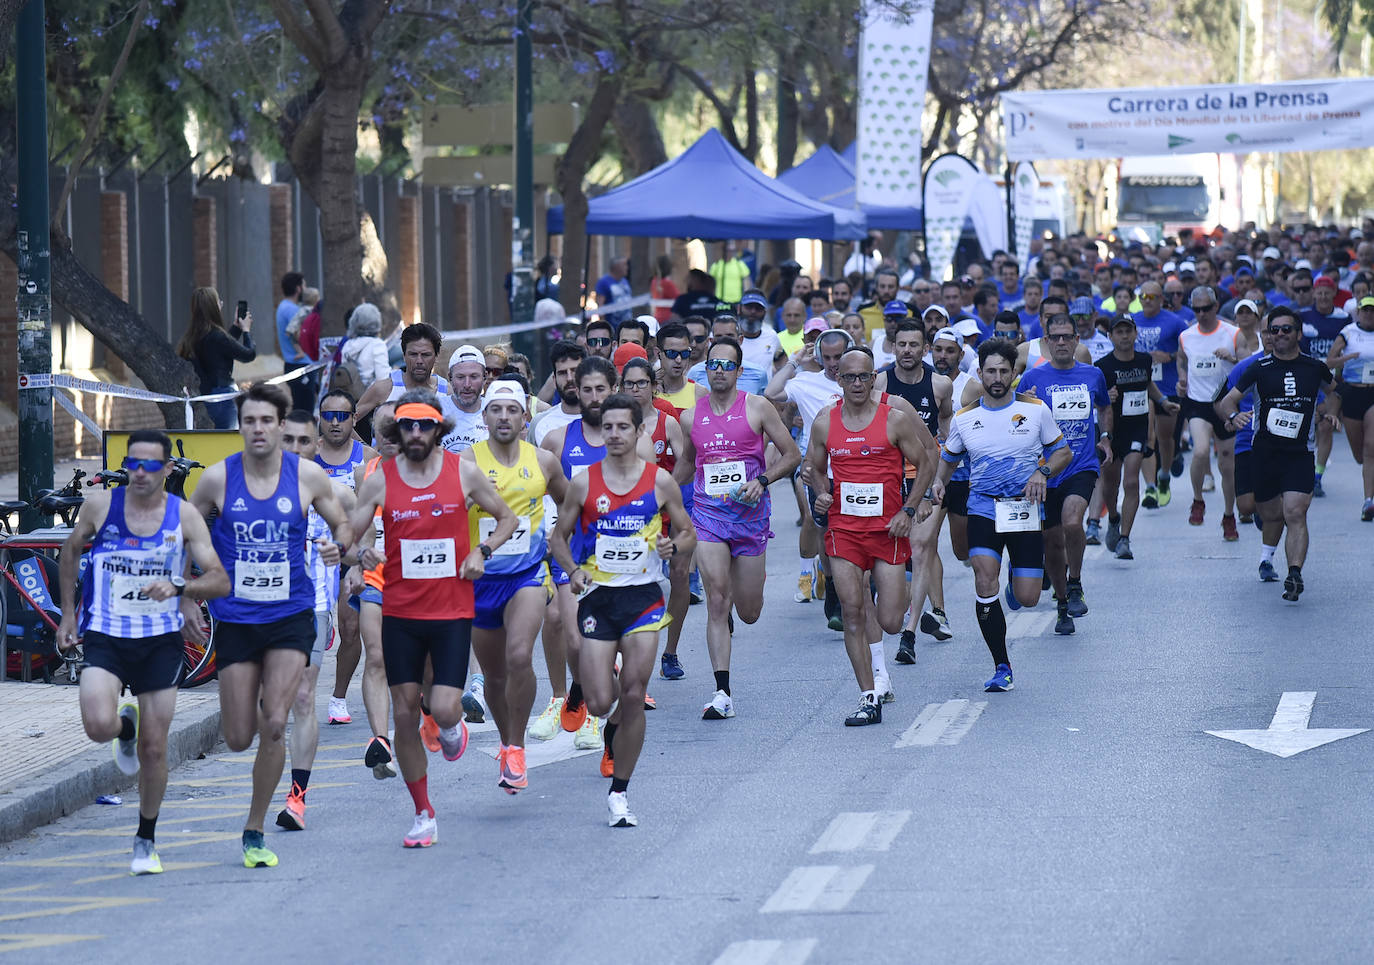 Runners at the start of the 7km route. 